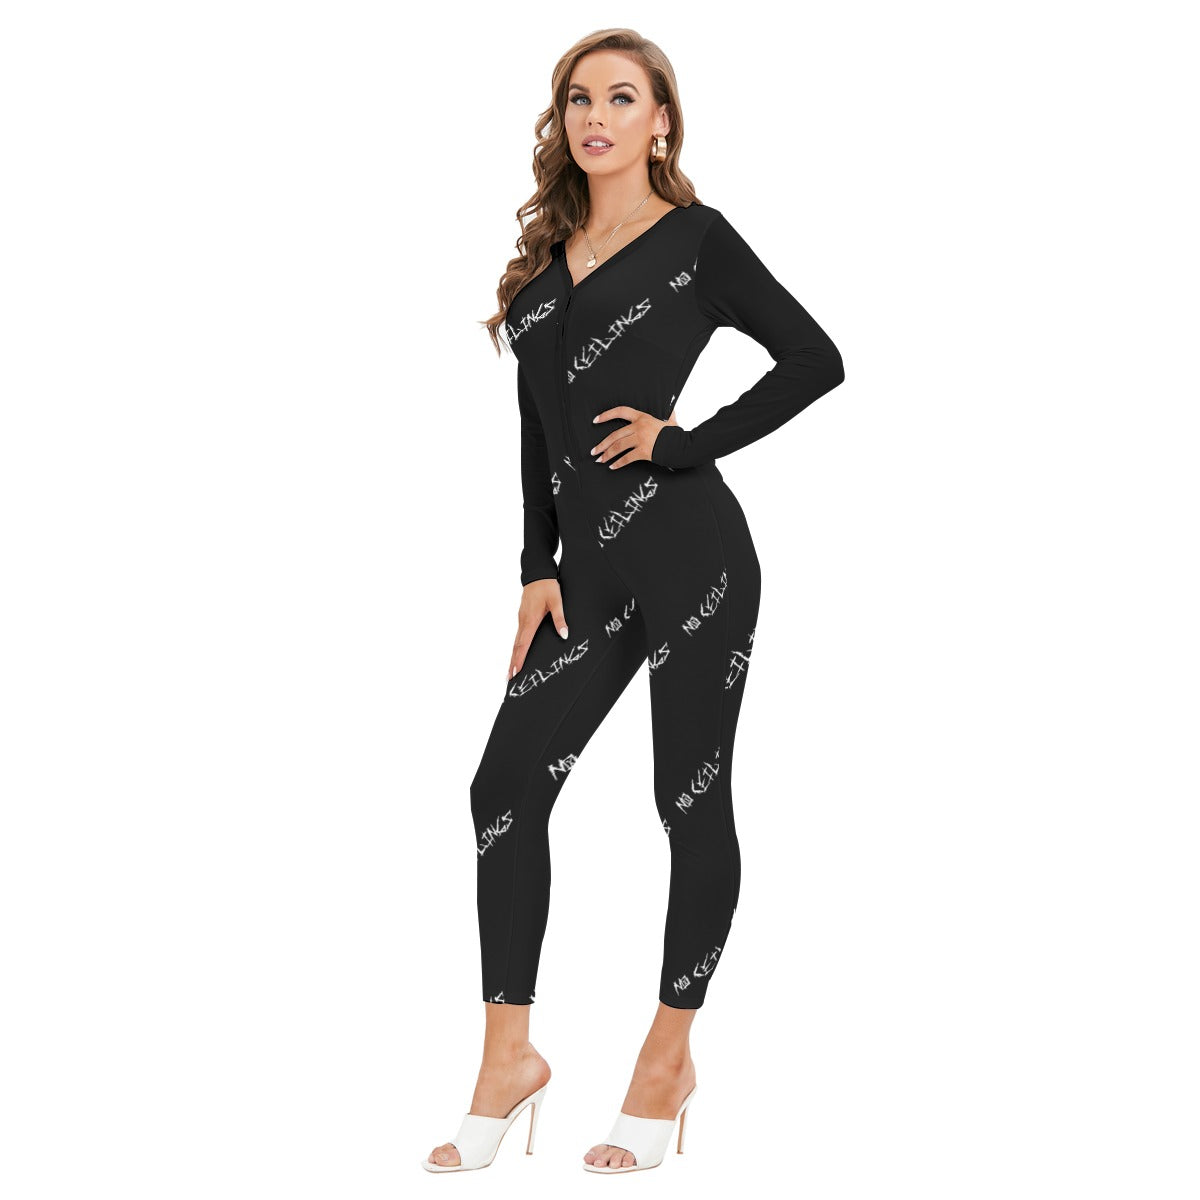 All-Over Print Women's Plunging Neck Jumpsuit